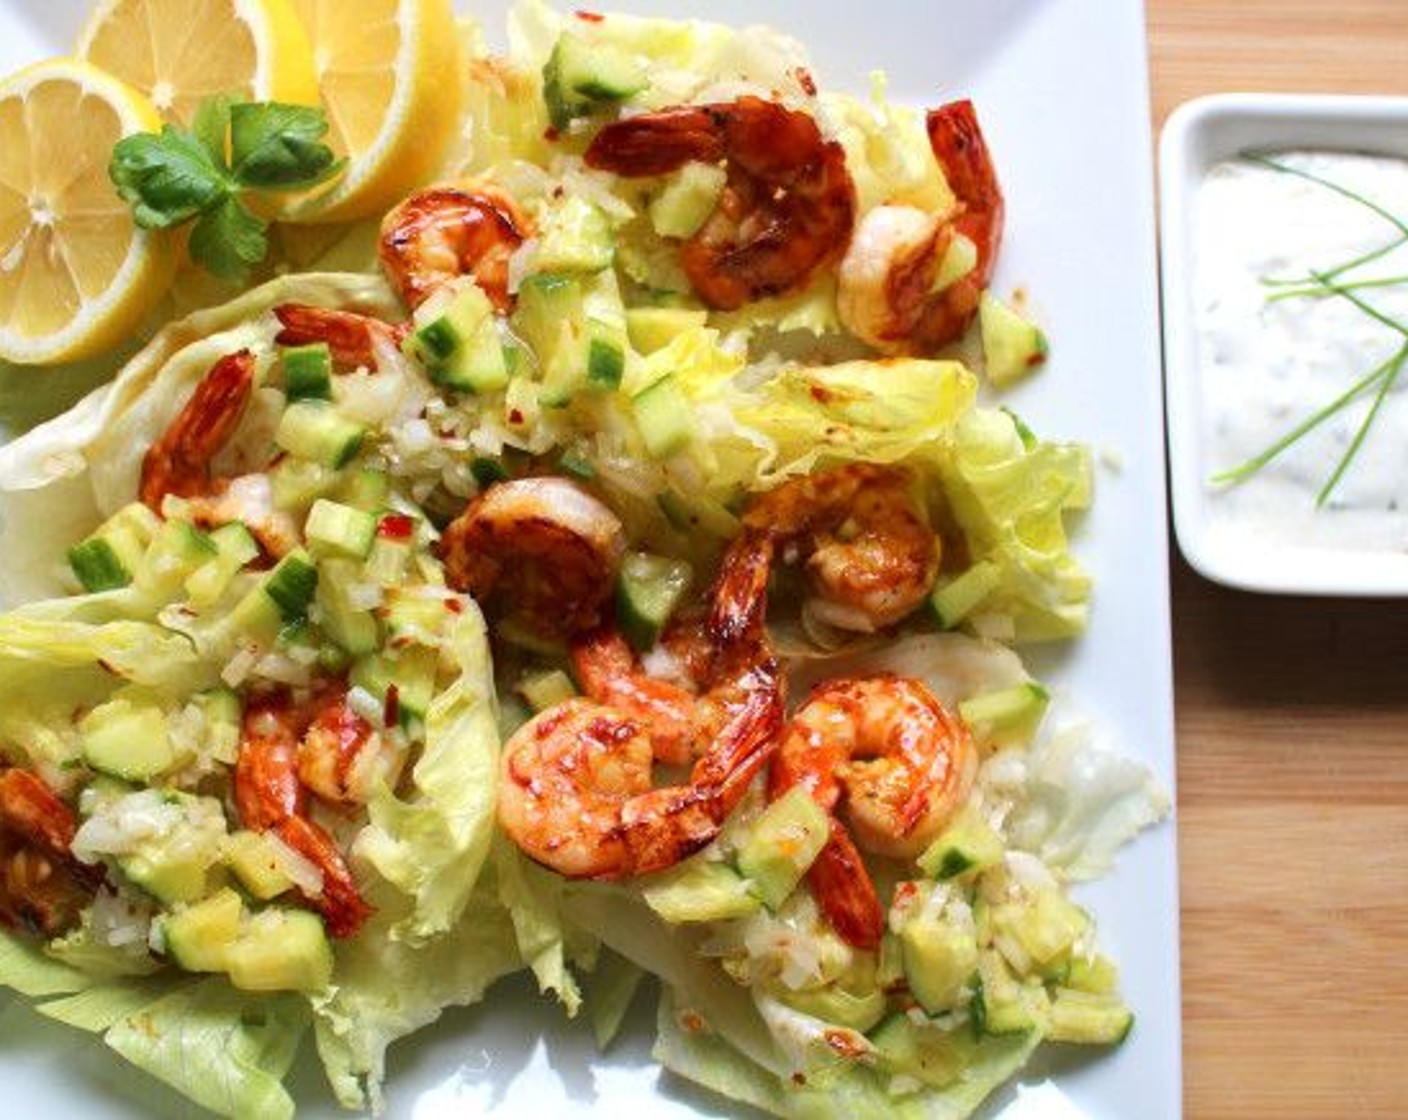 step 4 Spread some Iceberg Lettuce (to taste) on a serving plate. Drizzle with Vinaigrette (to taste), and top with the shrimp and salsa before serving.